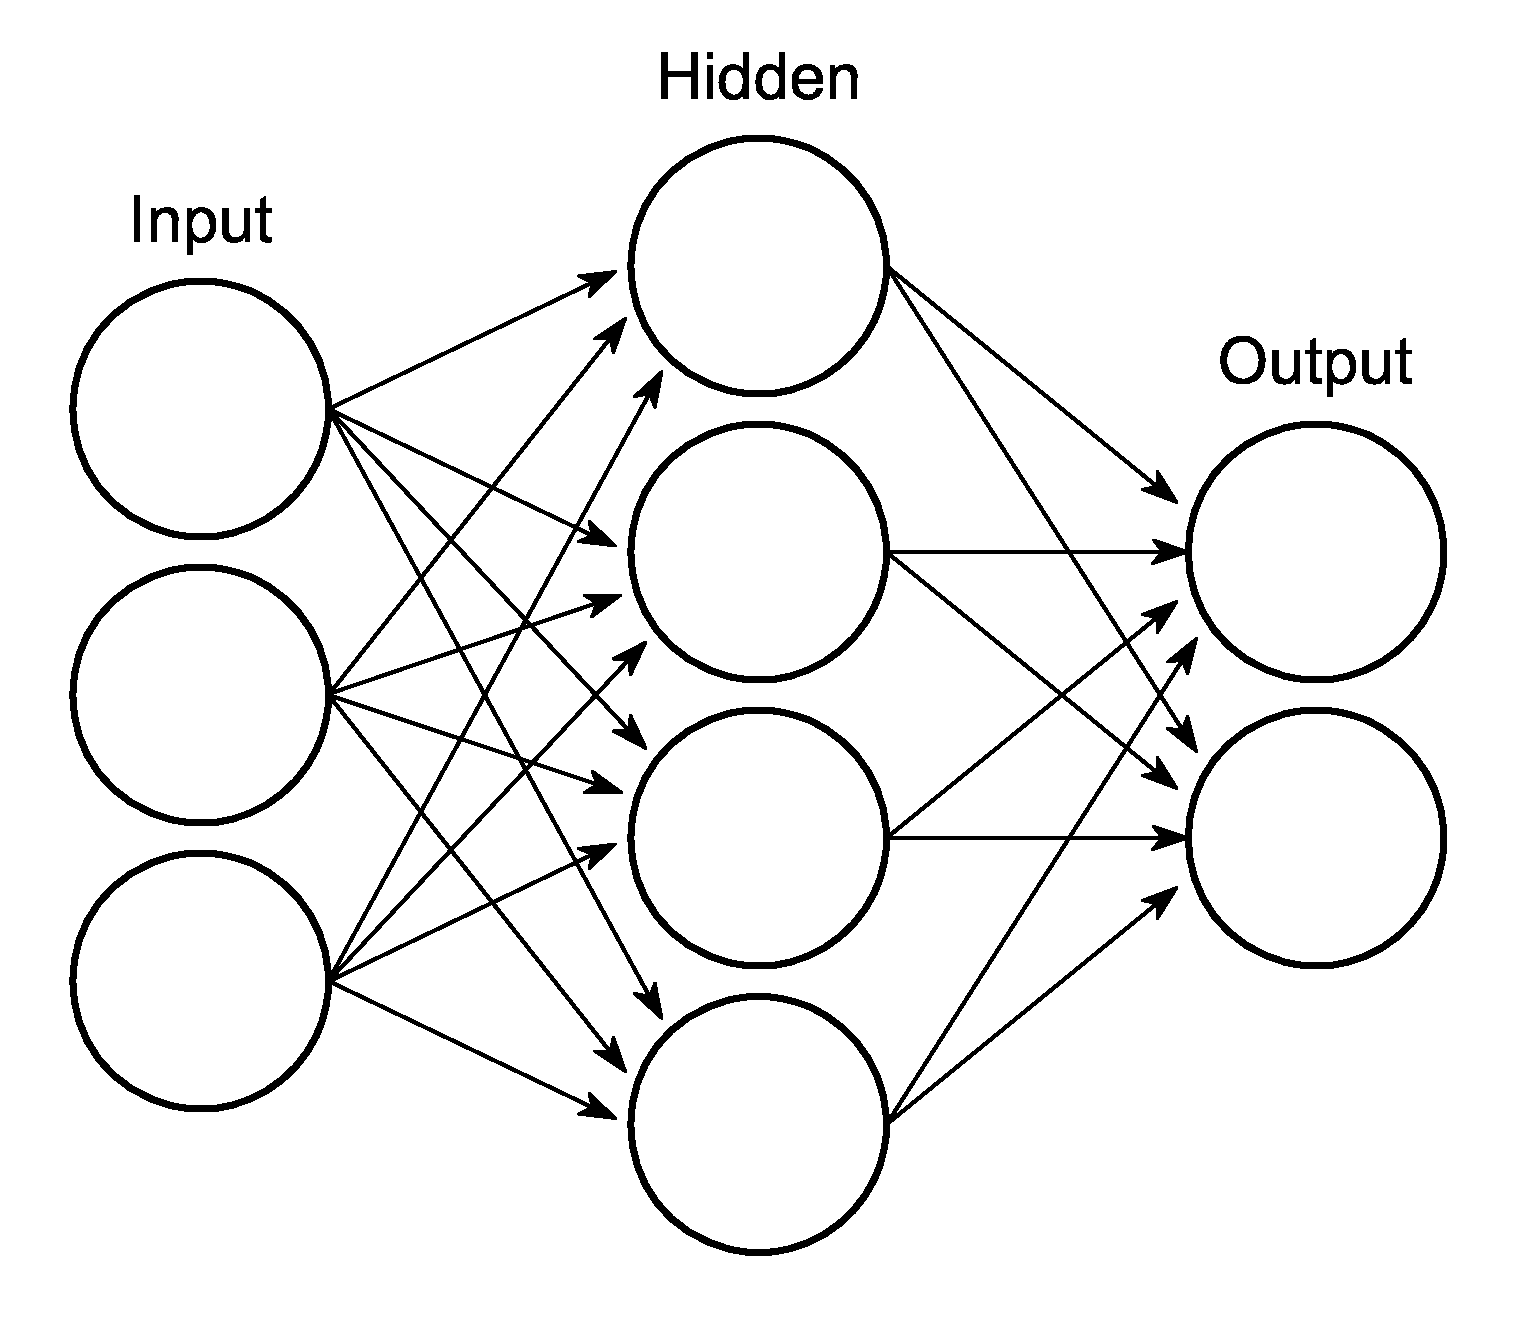 Neural network frequency control